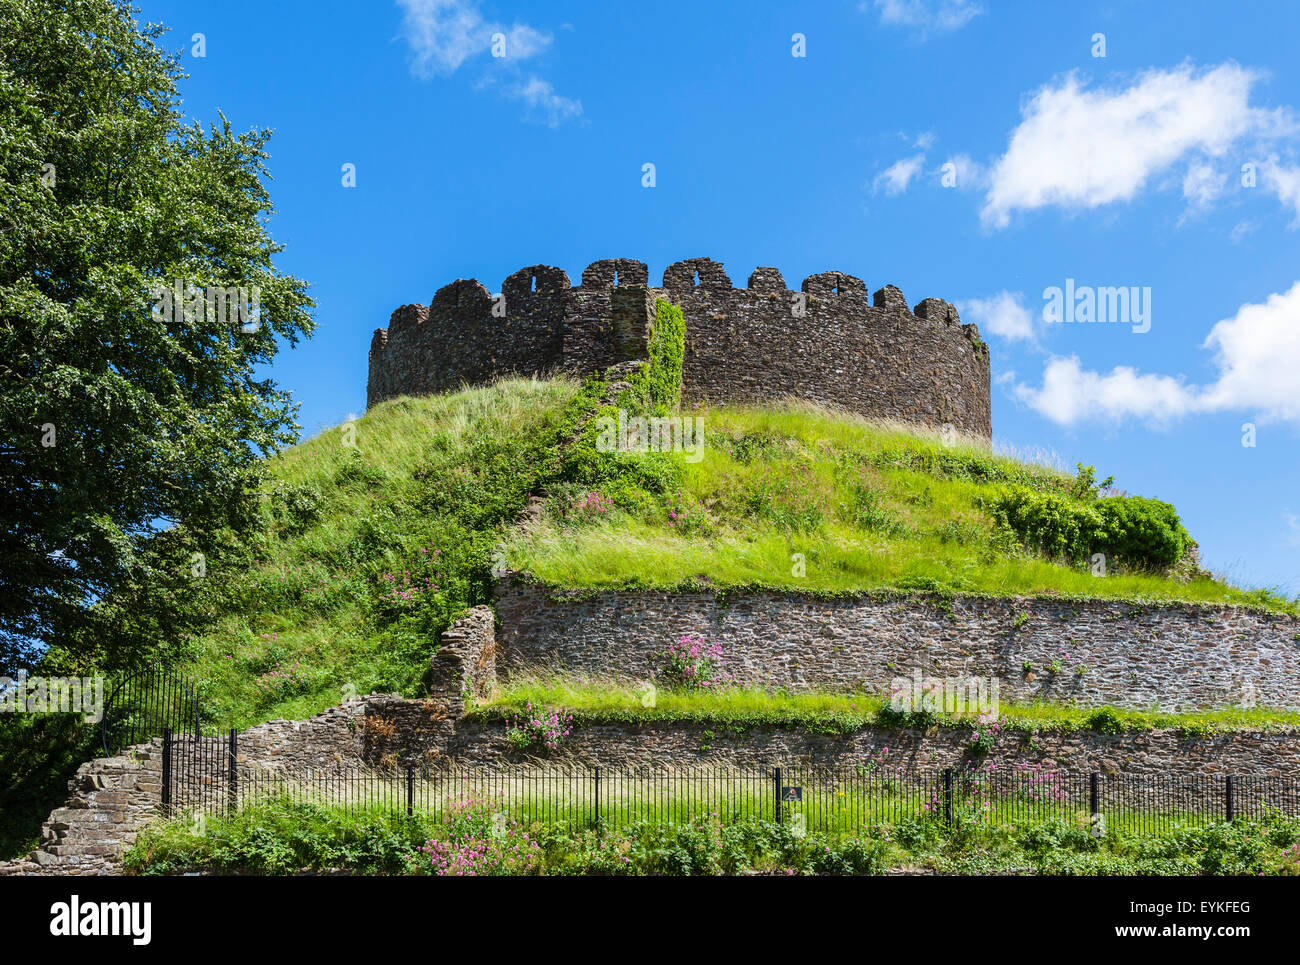 The medieval keep of Totnes Castle, an example of a Norman motte-and-bailey castle, Totnes, Devon, England, UK Stock Photo